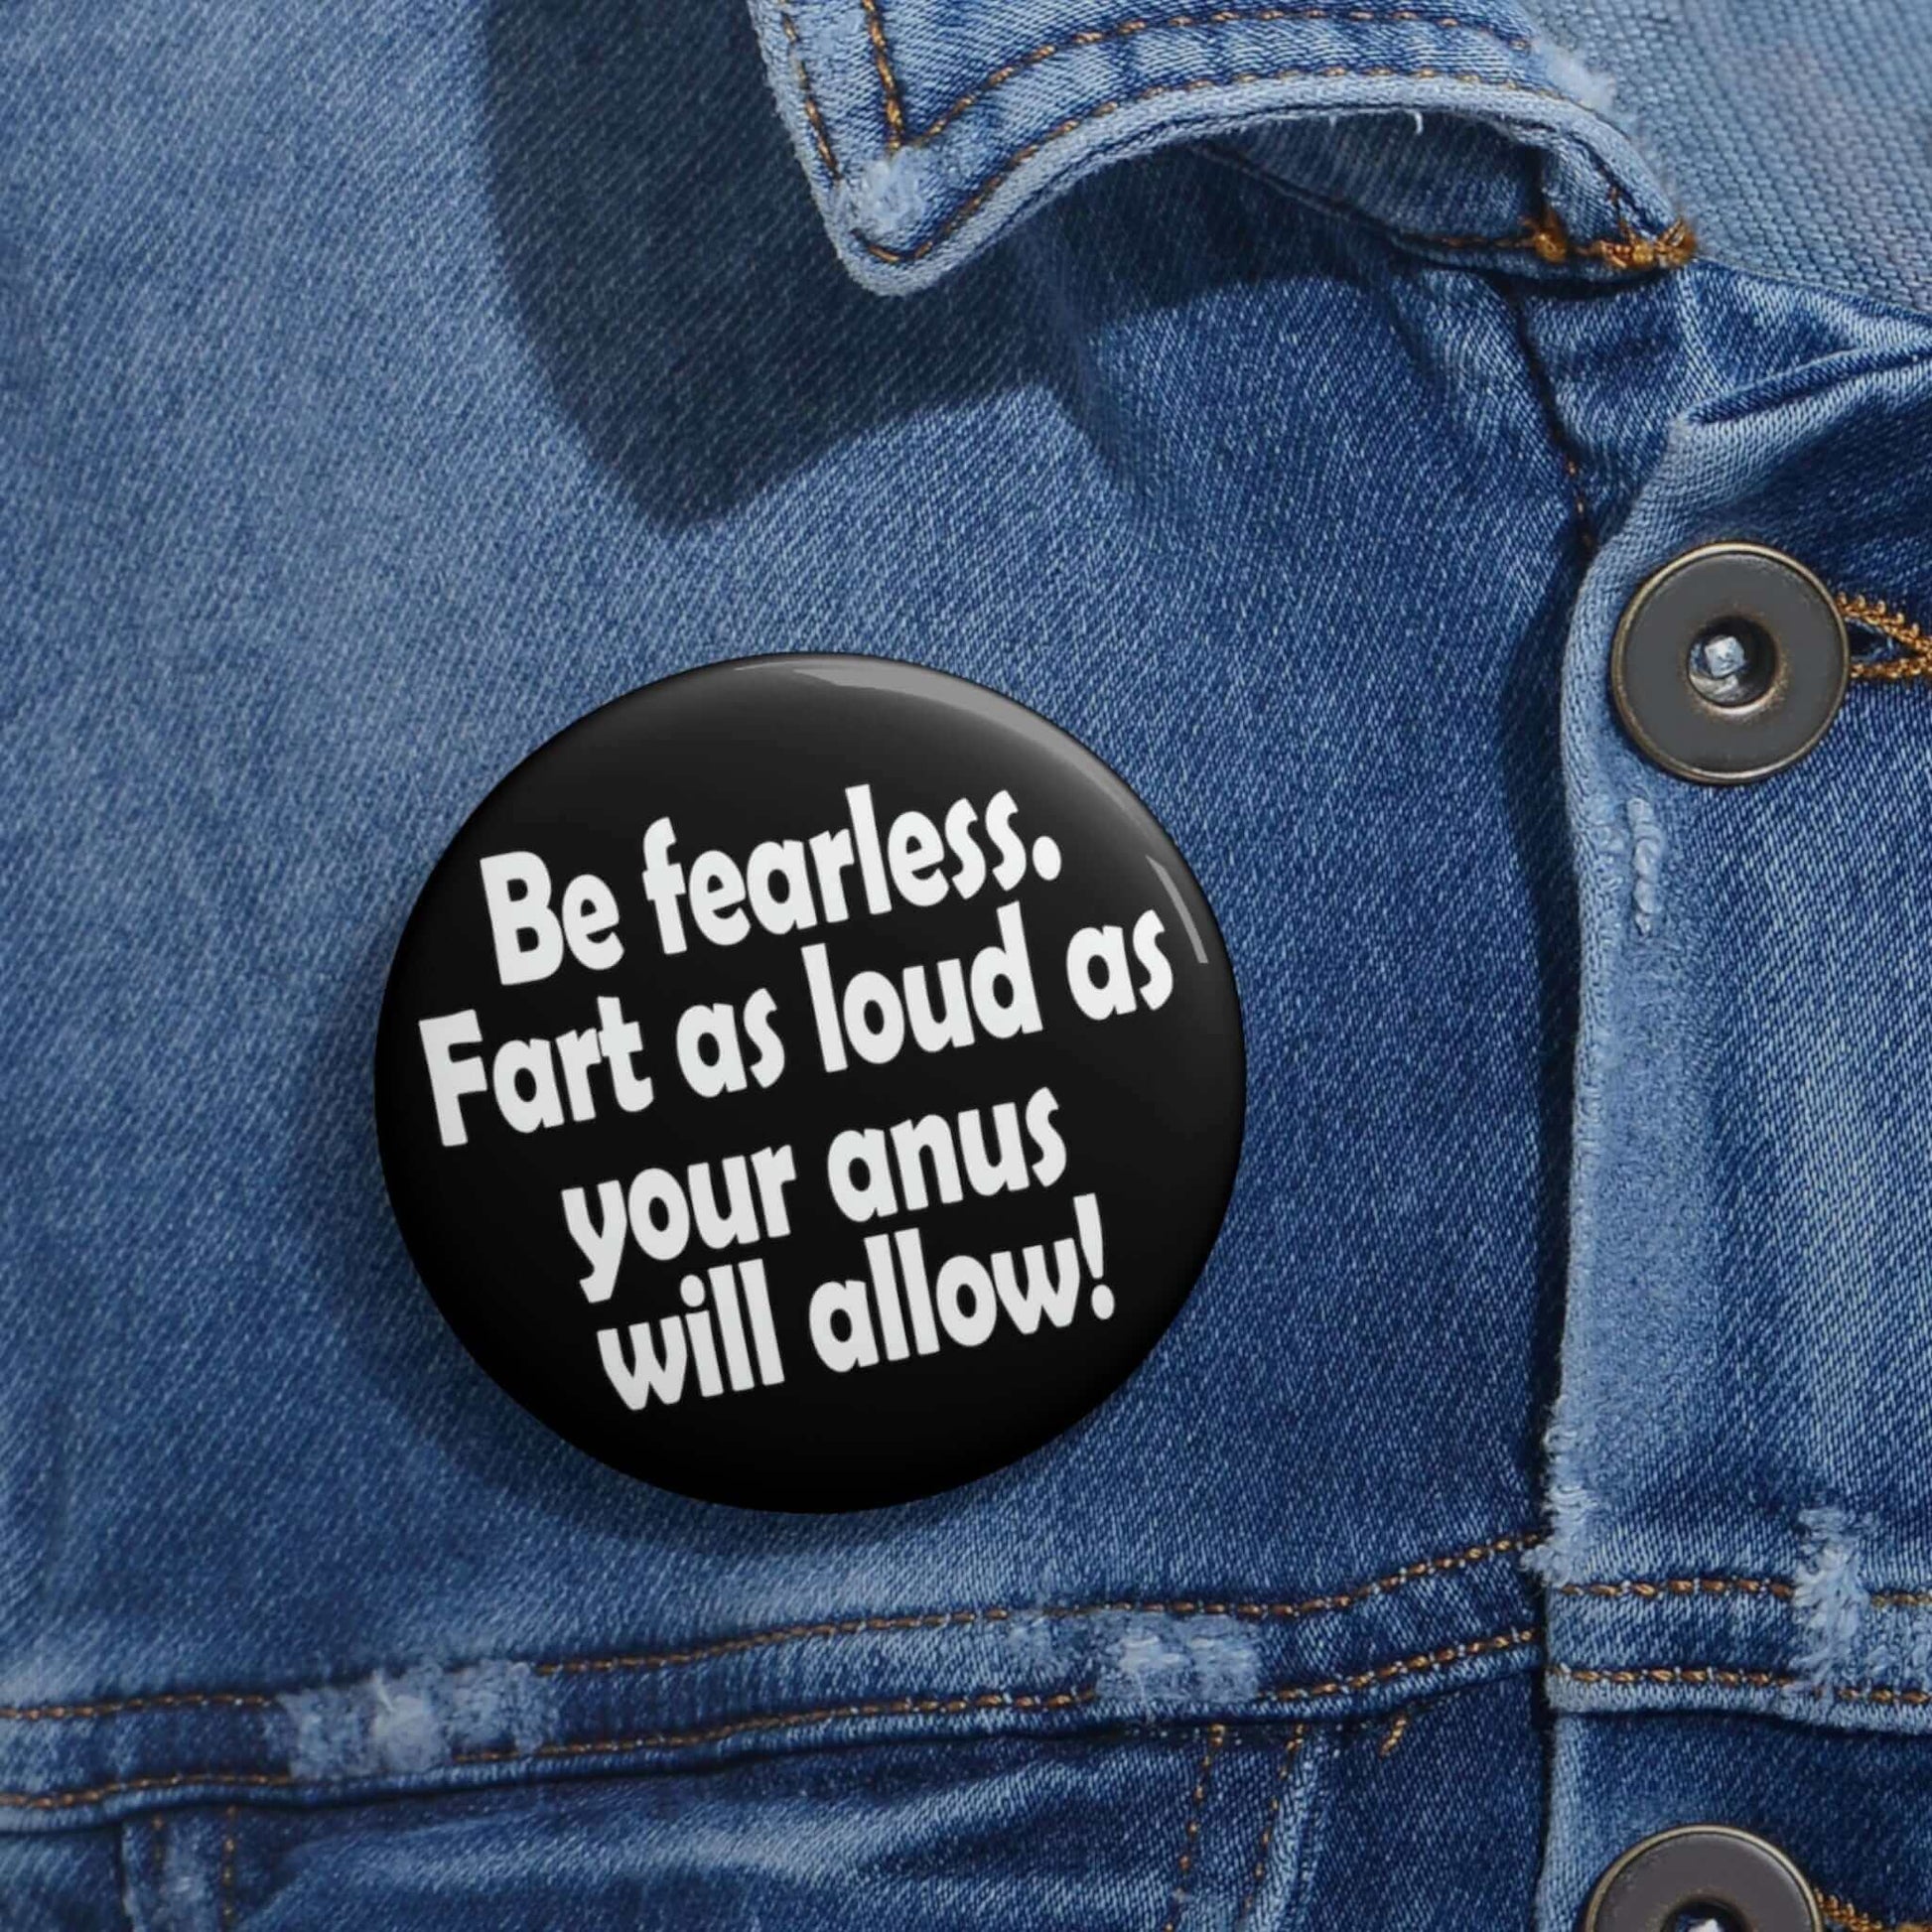 Funny motivational pinback button that says Be fearless. Fart as loud as your anus will allow.